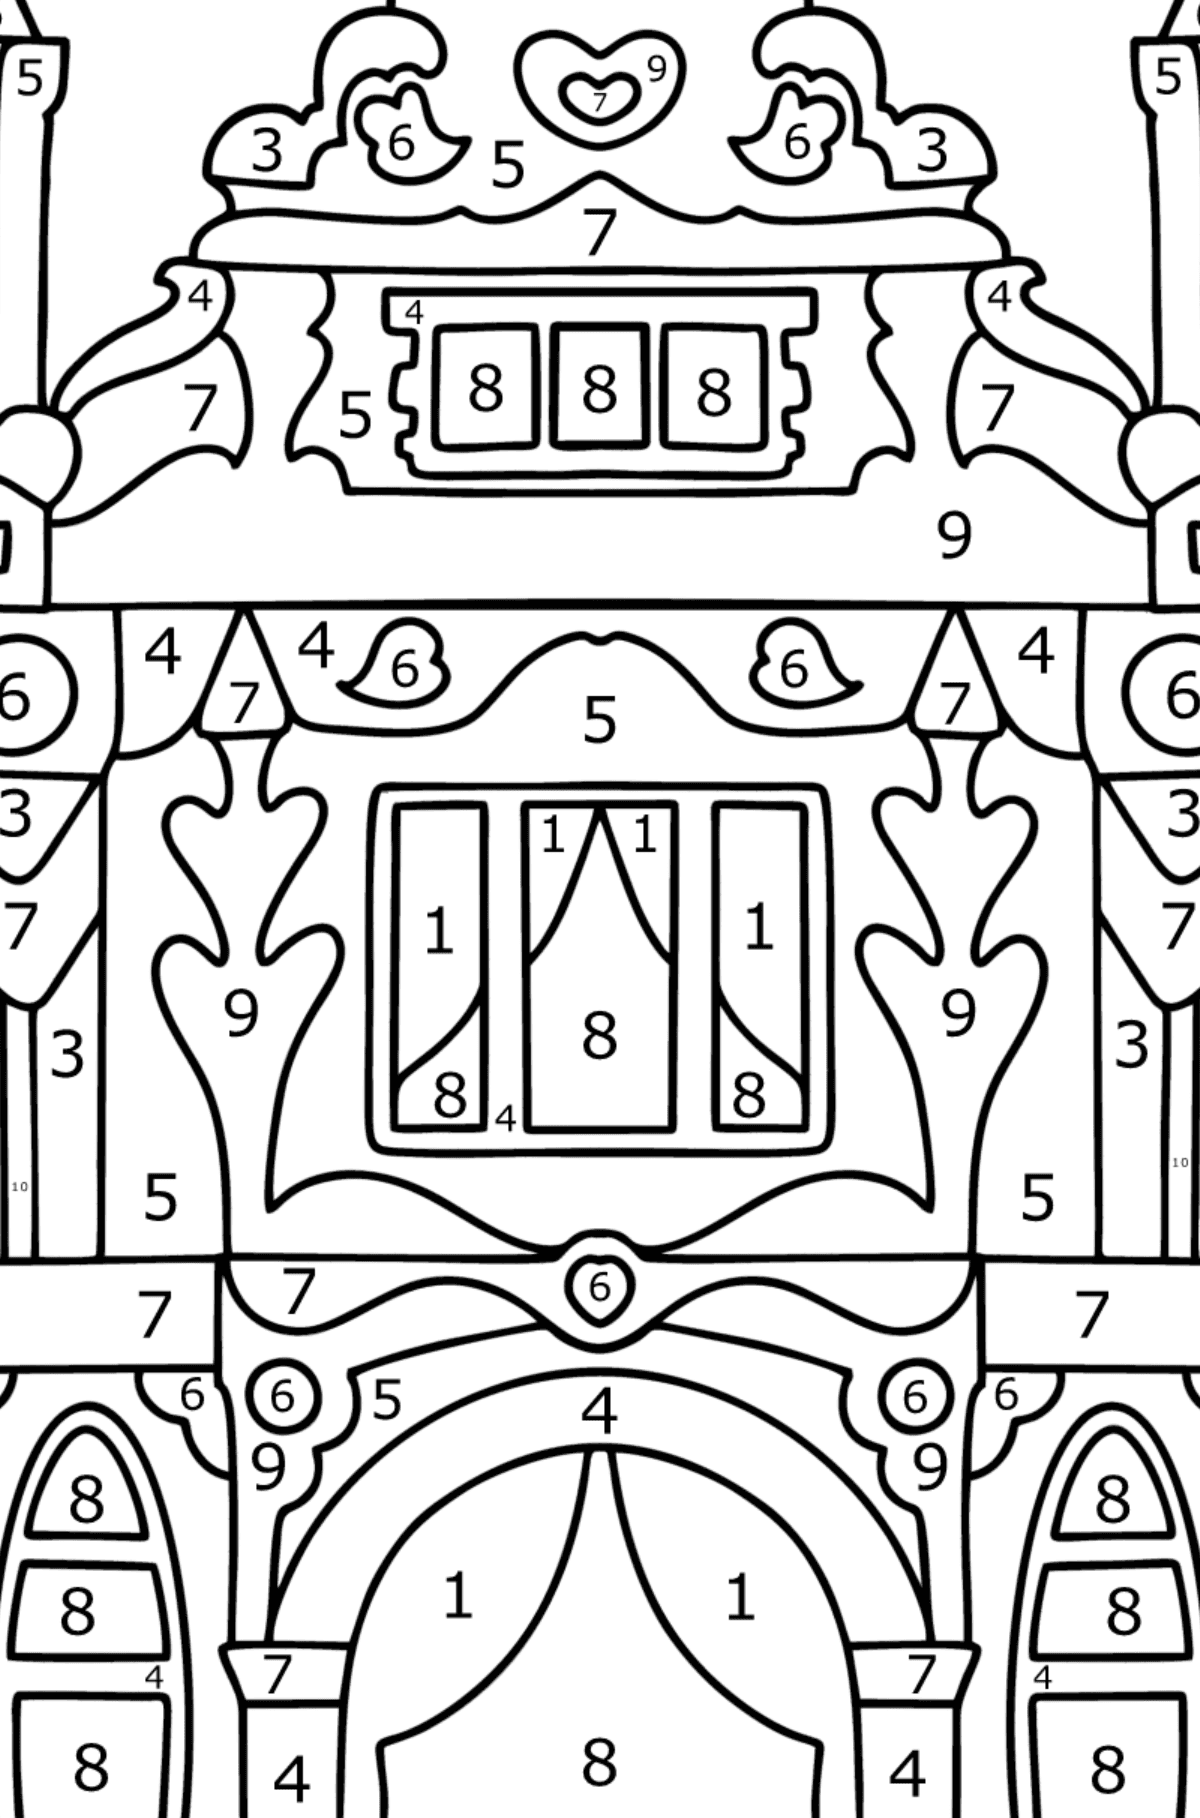 Two Storey House coloring page - Coloring by Numbers for Kids